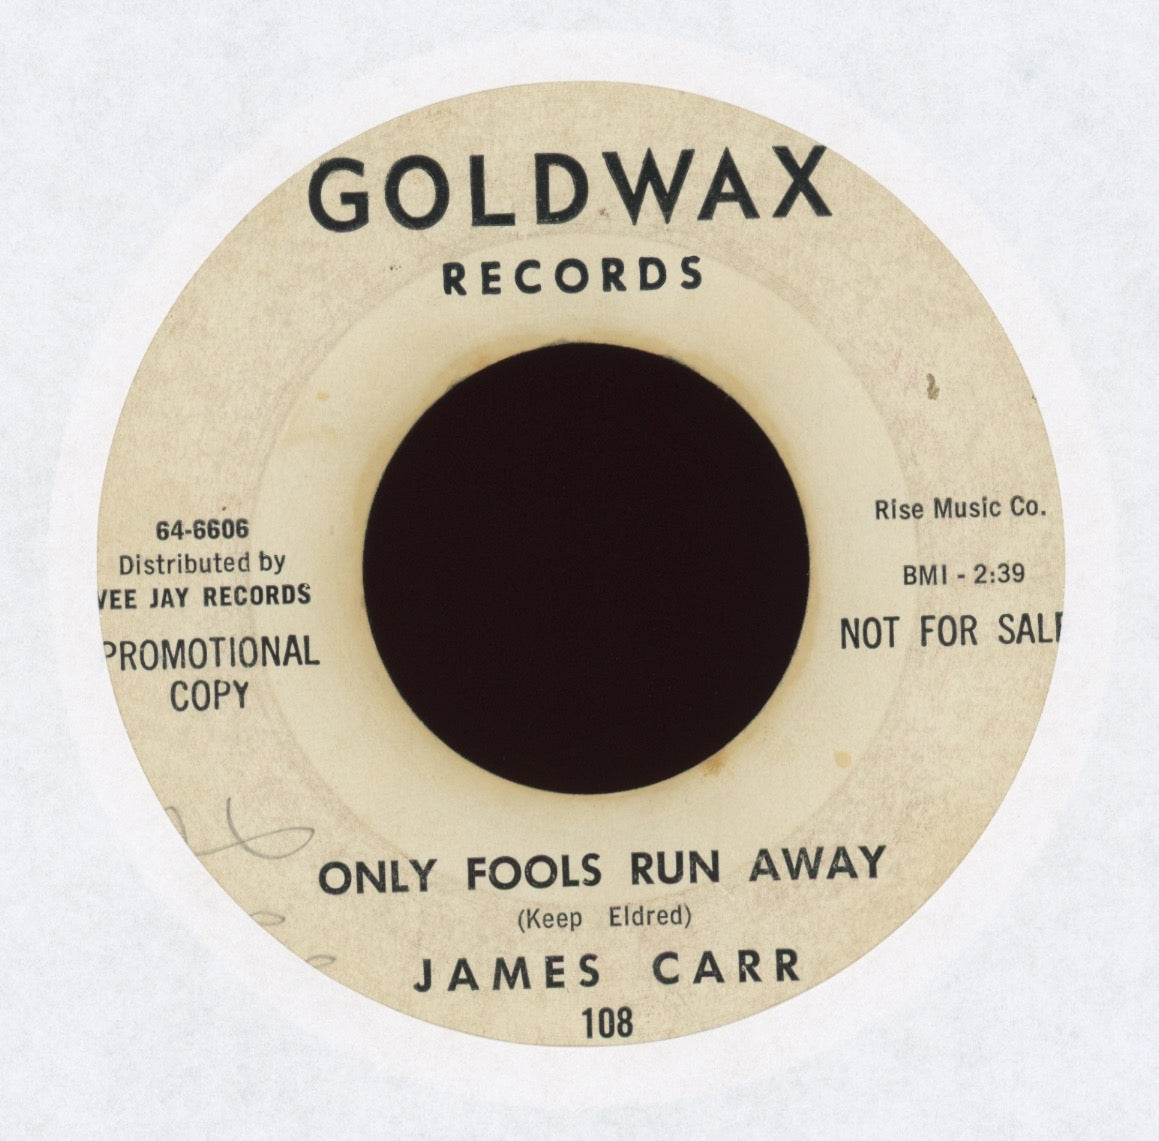 James Carr - Only Fools Run Away on Goldwax Promo